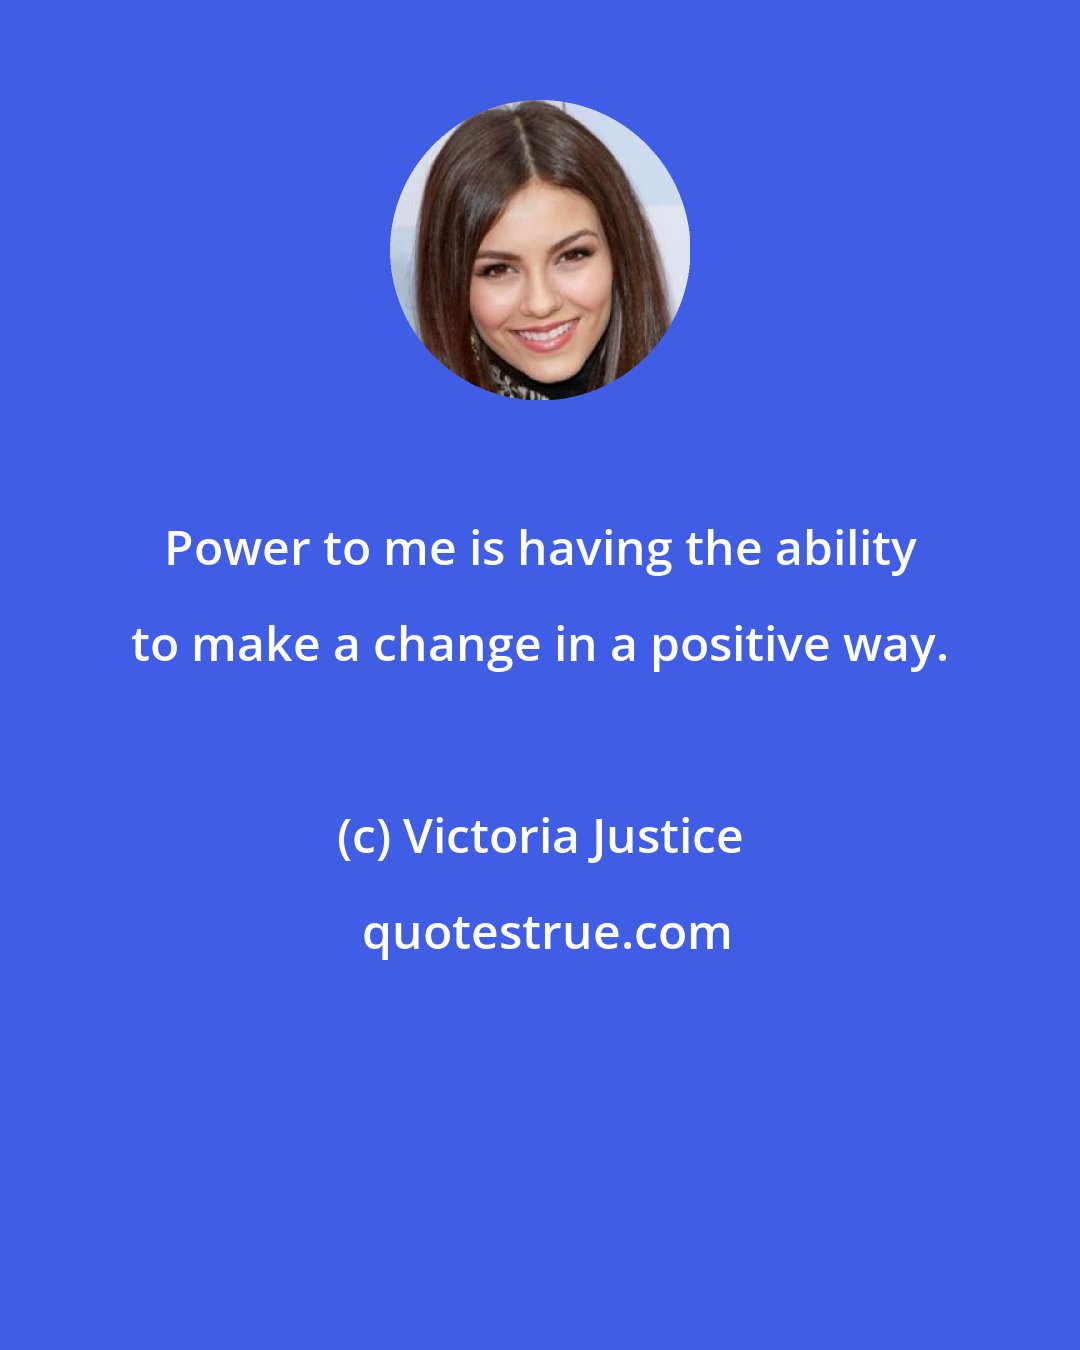 Victoria Justice: Power to me is having the ability to make a change in a positive way.